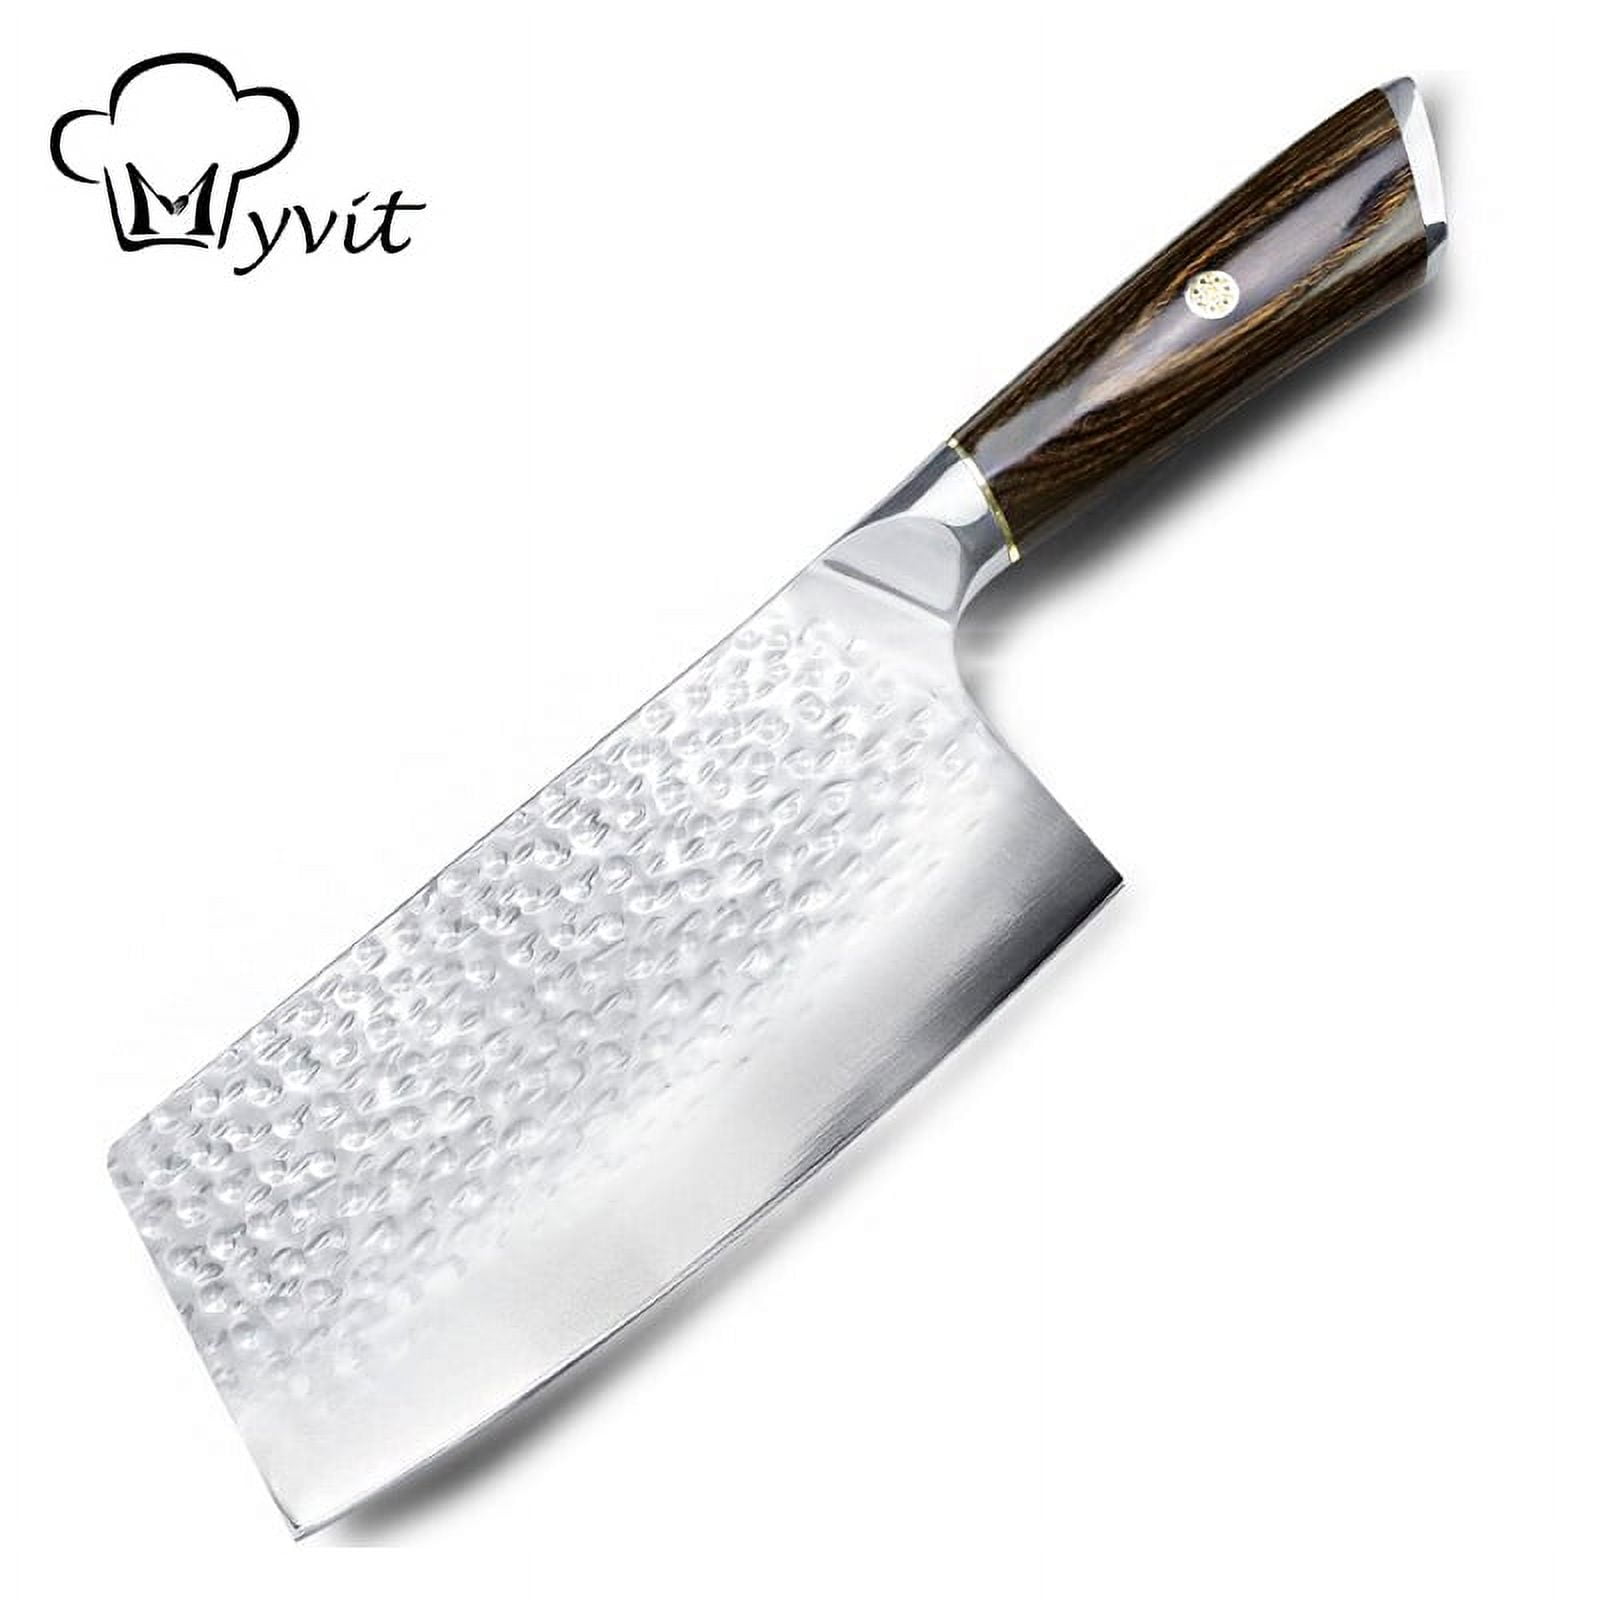  MAD SHARK Meat Cleaver, Professional 7.5 Inch Bone Chopping  Butcher Knife with Heavy Duty Blade, German Military Grade Composite Steel,  Chinese Chef's Bone Cutting Knife for Home Kitchen & Restaurant 